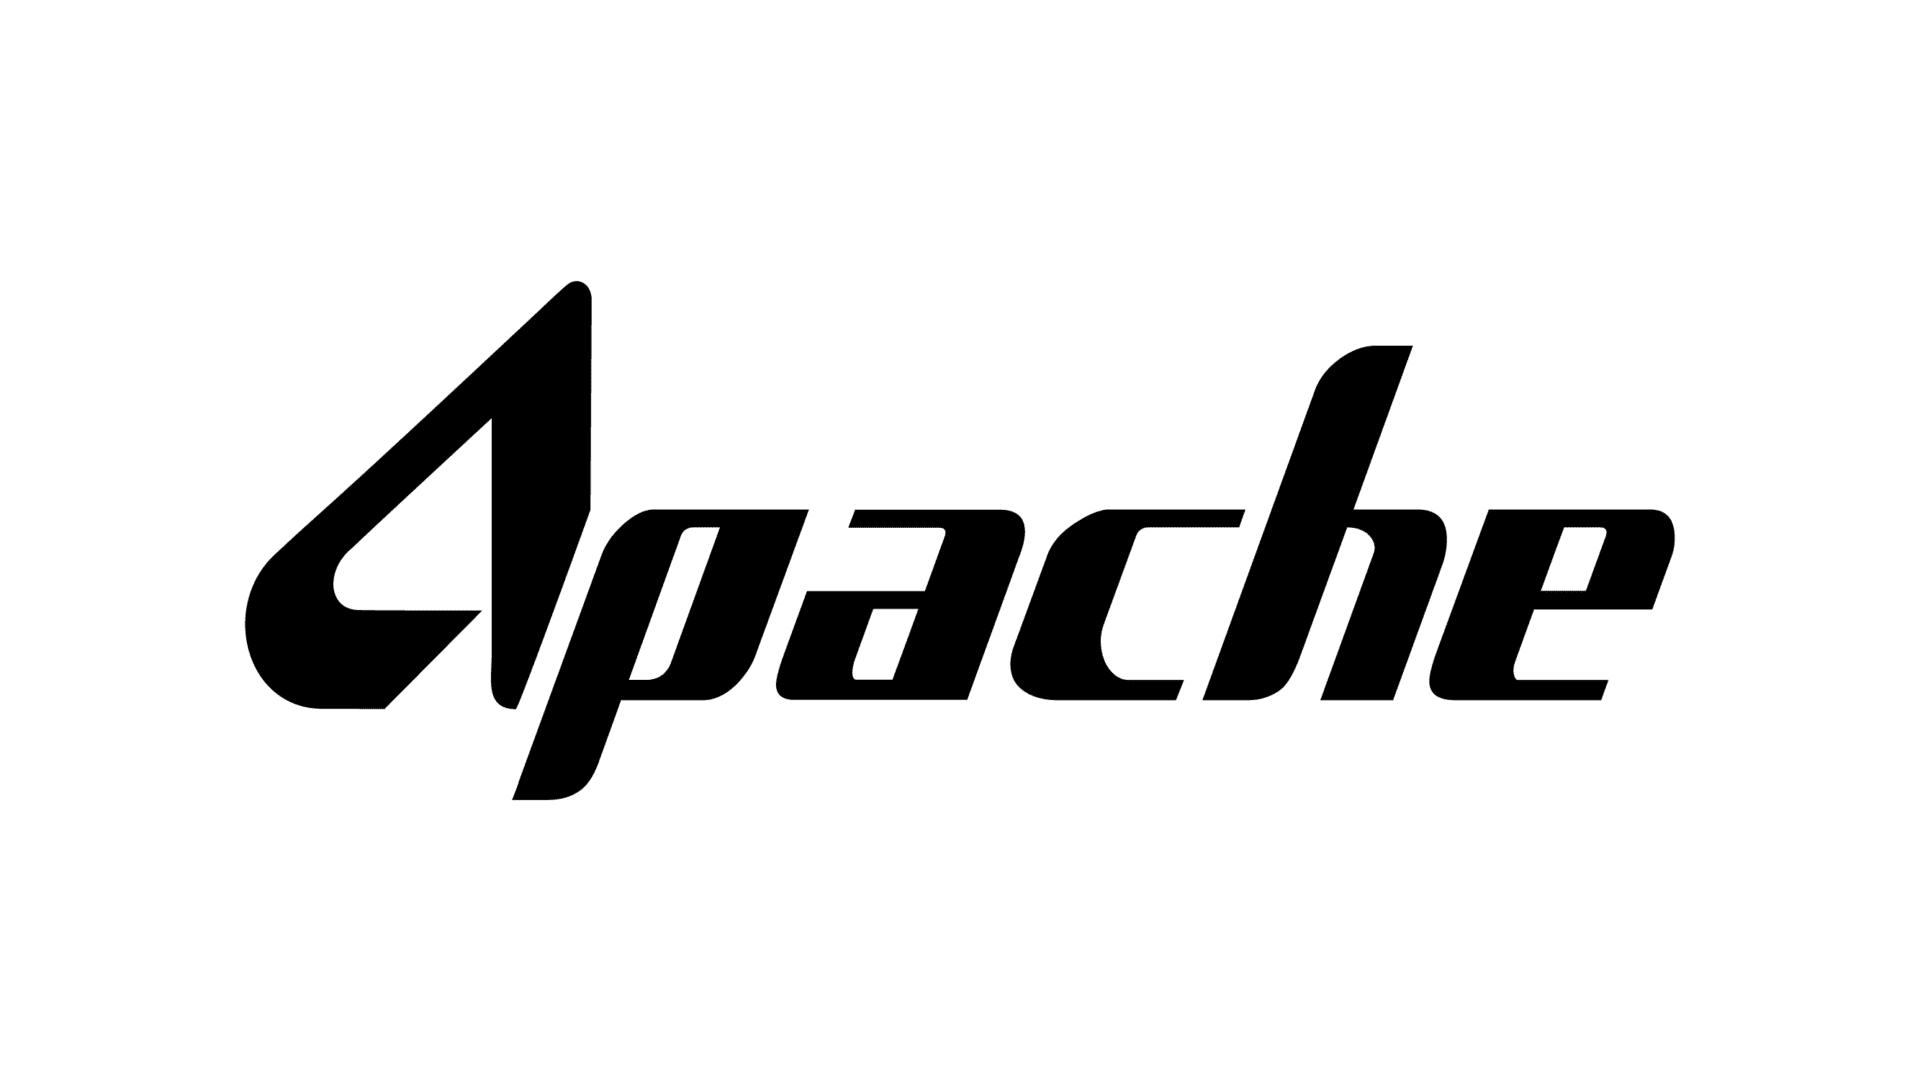 Distinguished Lectures are supported by Apache Corporation